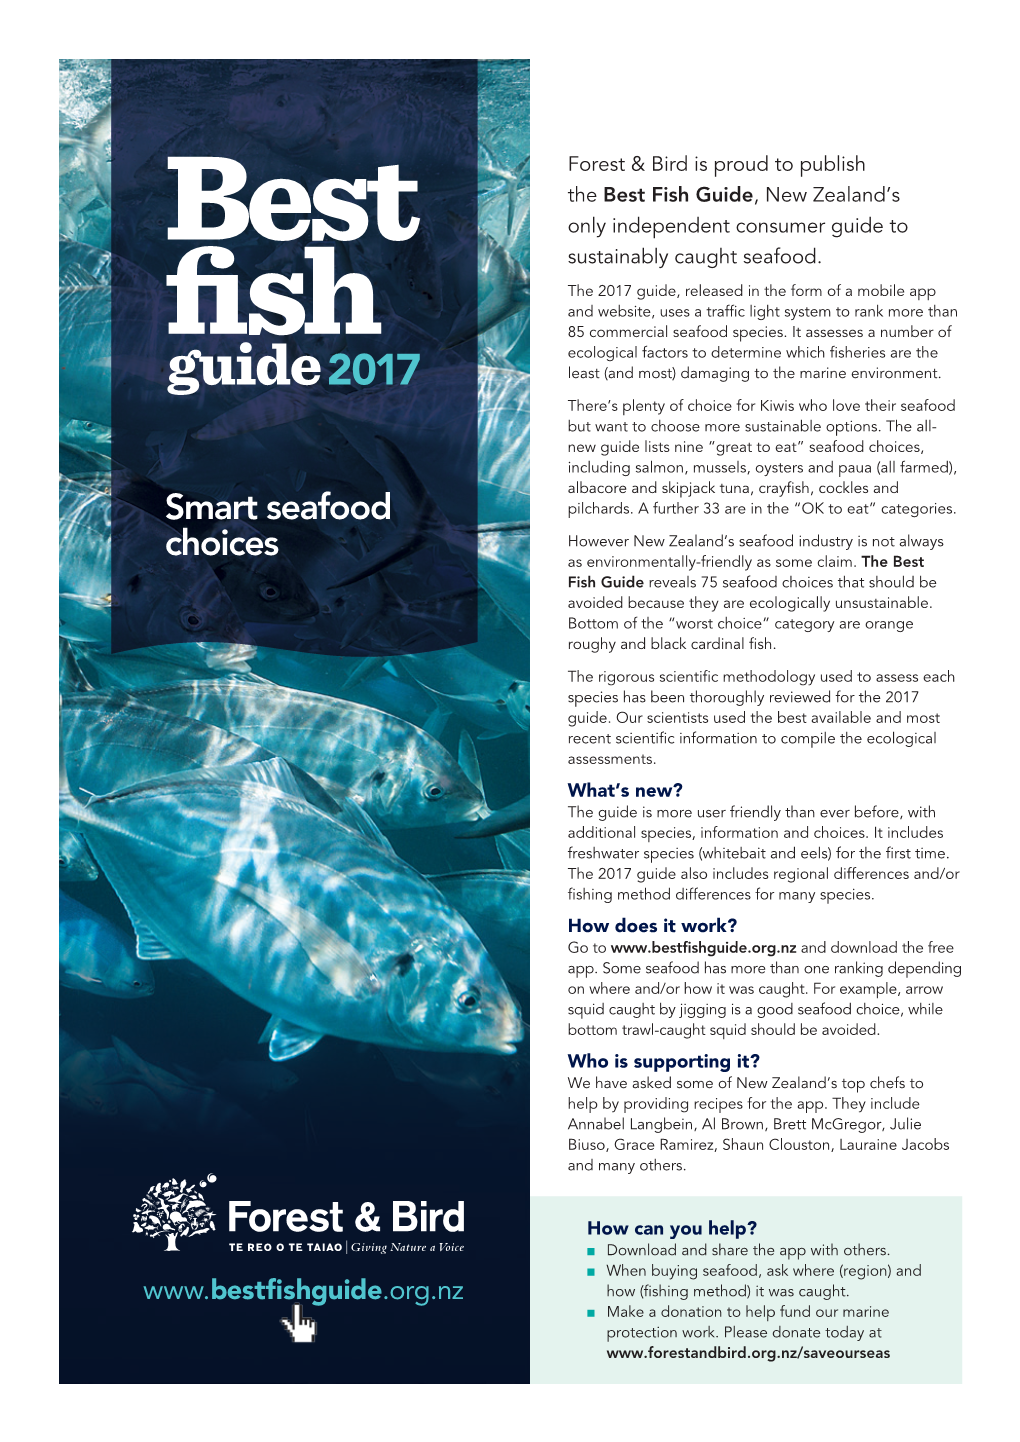 Best Fish Guide, New Zealand’S Only Independent Consumer Guide to Best Sustainably Caught Seafood